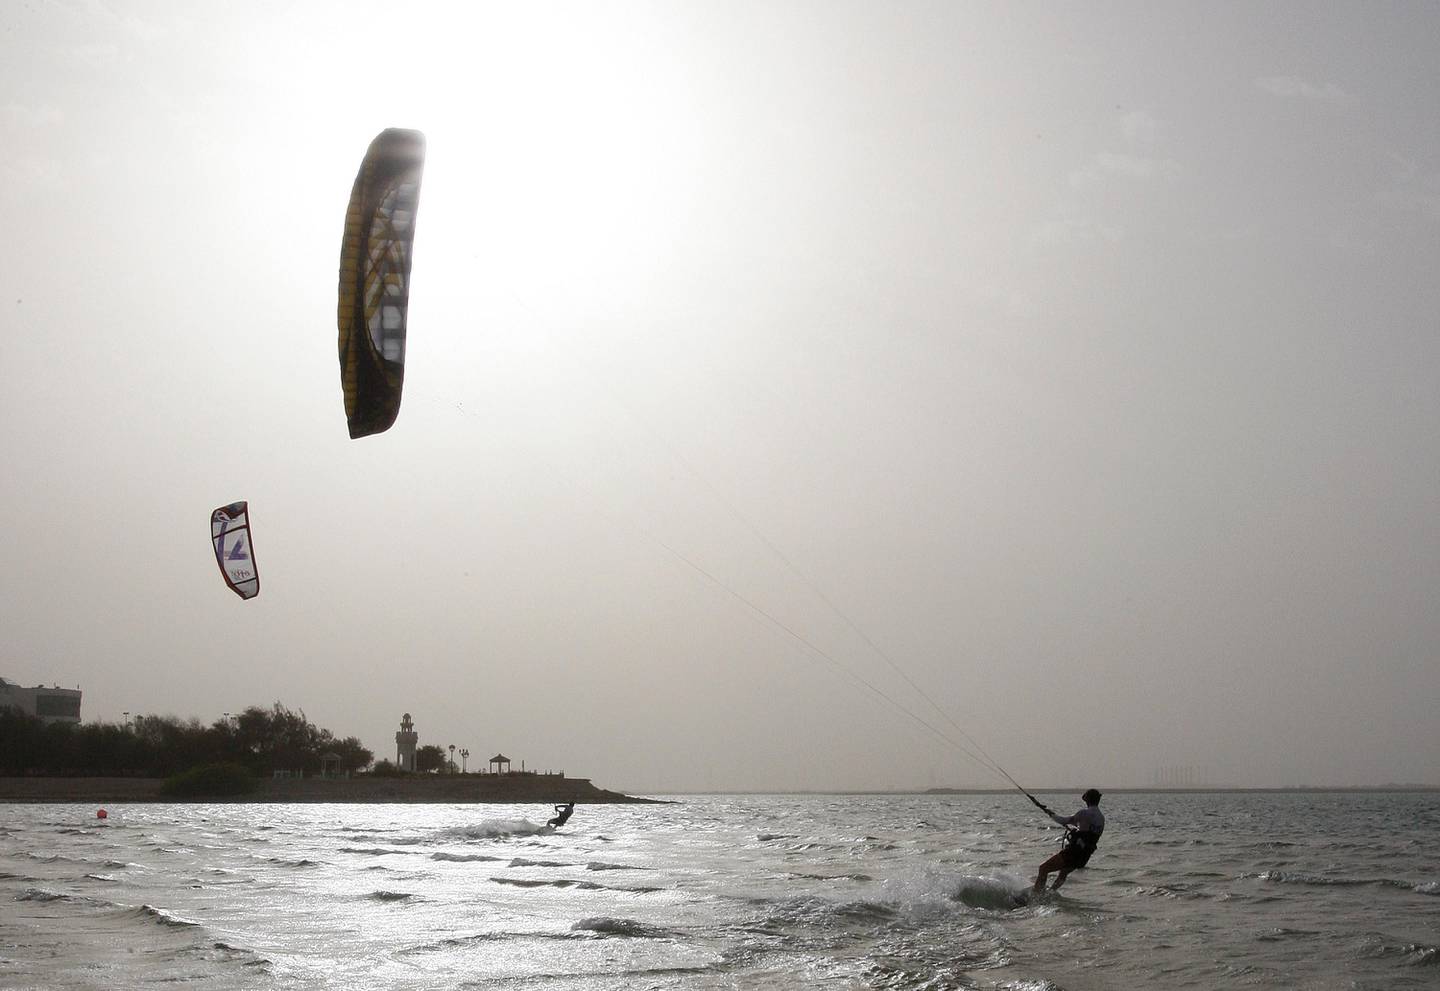  Mirfa Beach, United Arab Emirates, April 20 2012, 2012 Al Gharbia Watersports Festival- A kite surfers  just off the Mirfa Beach. Mike Young / The National